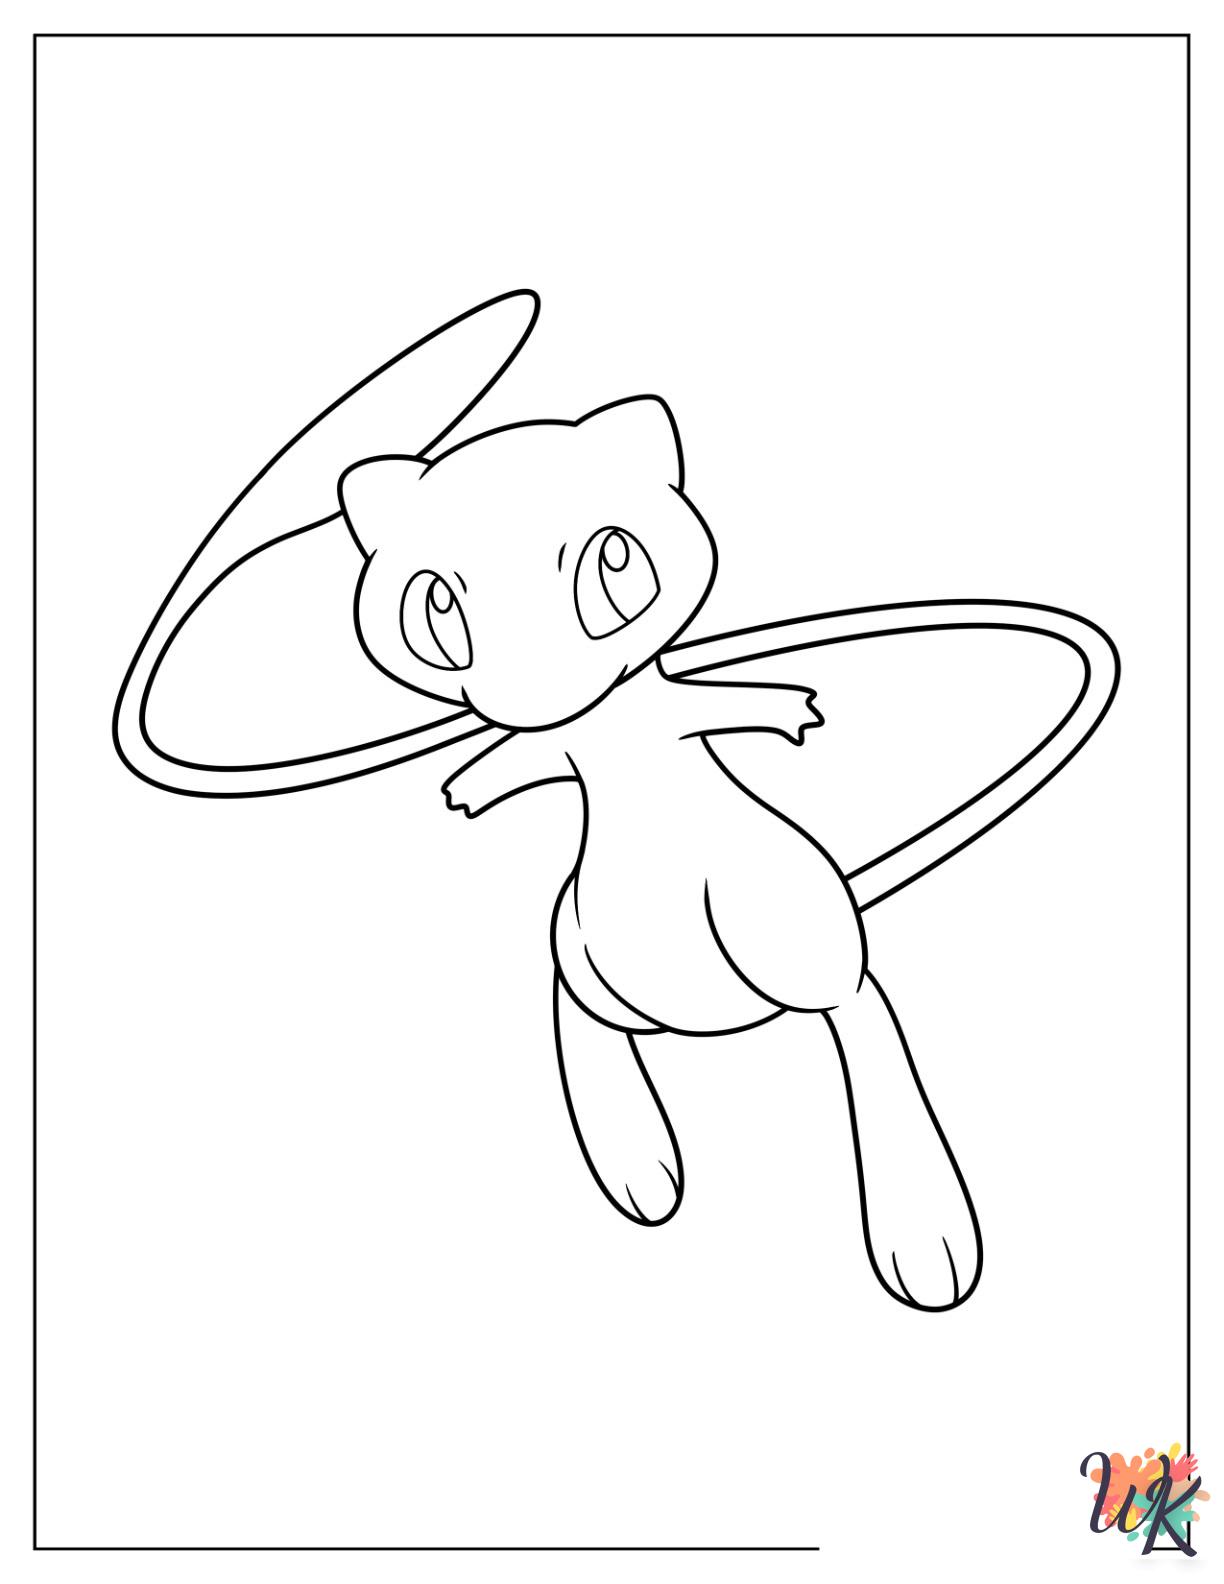 free Legendary Pokemon tree coloring pages